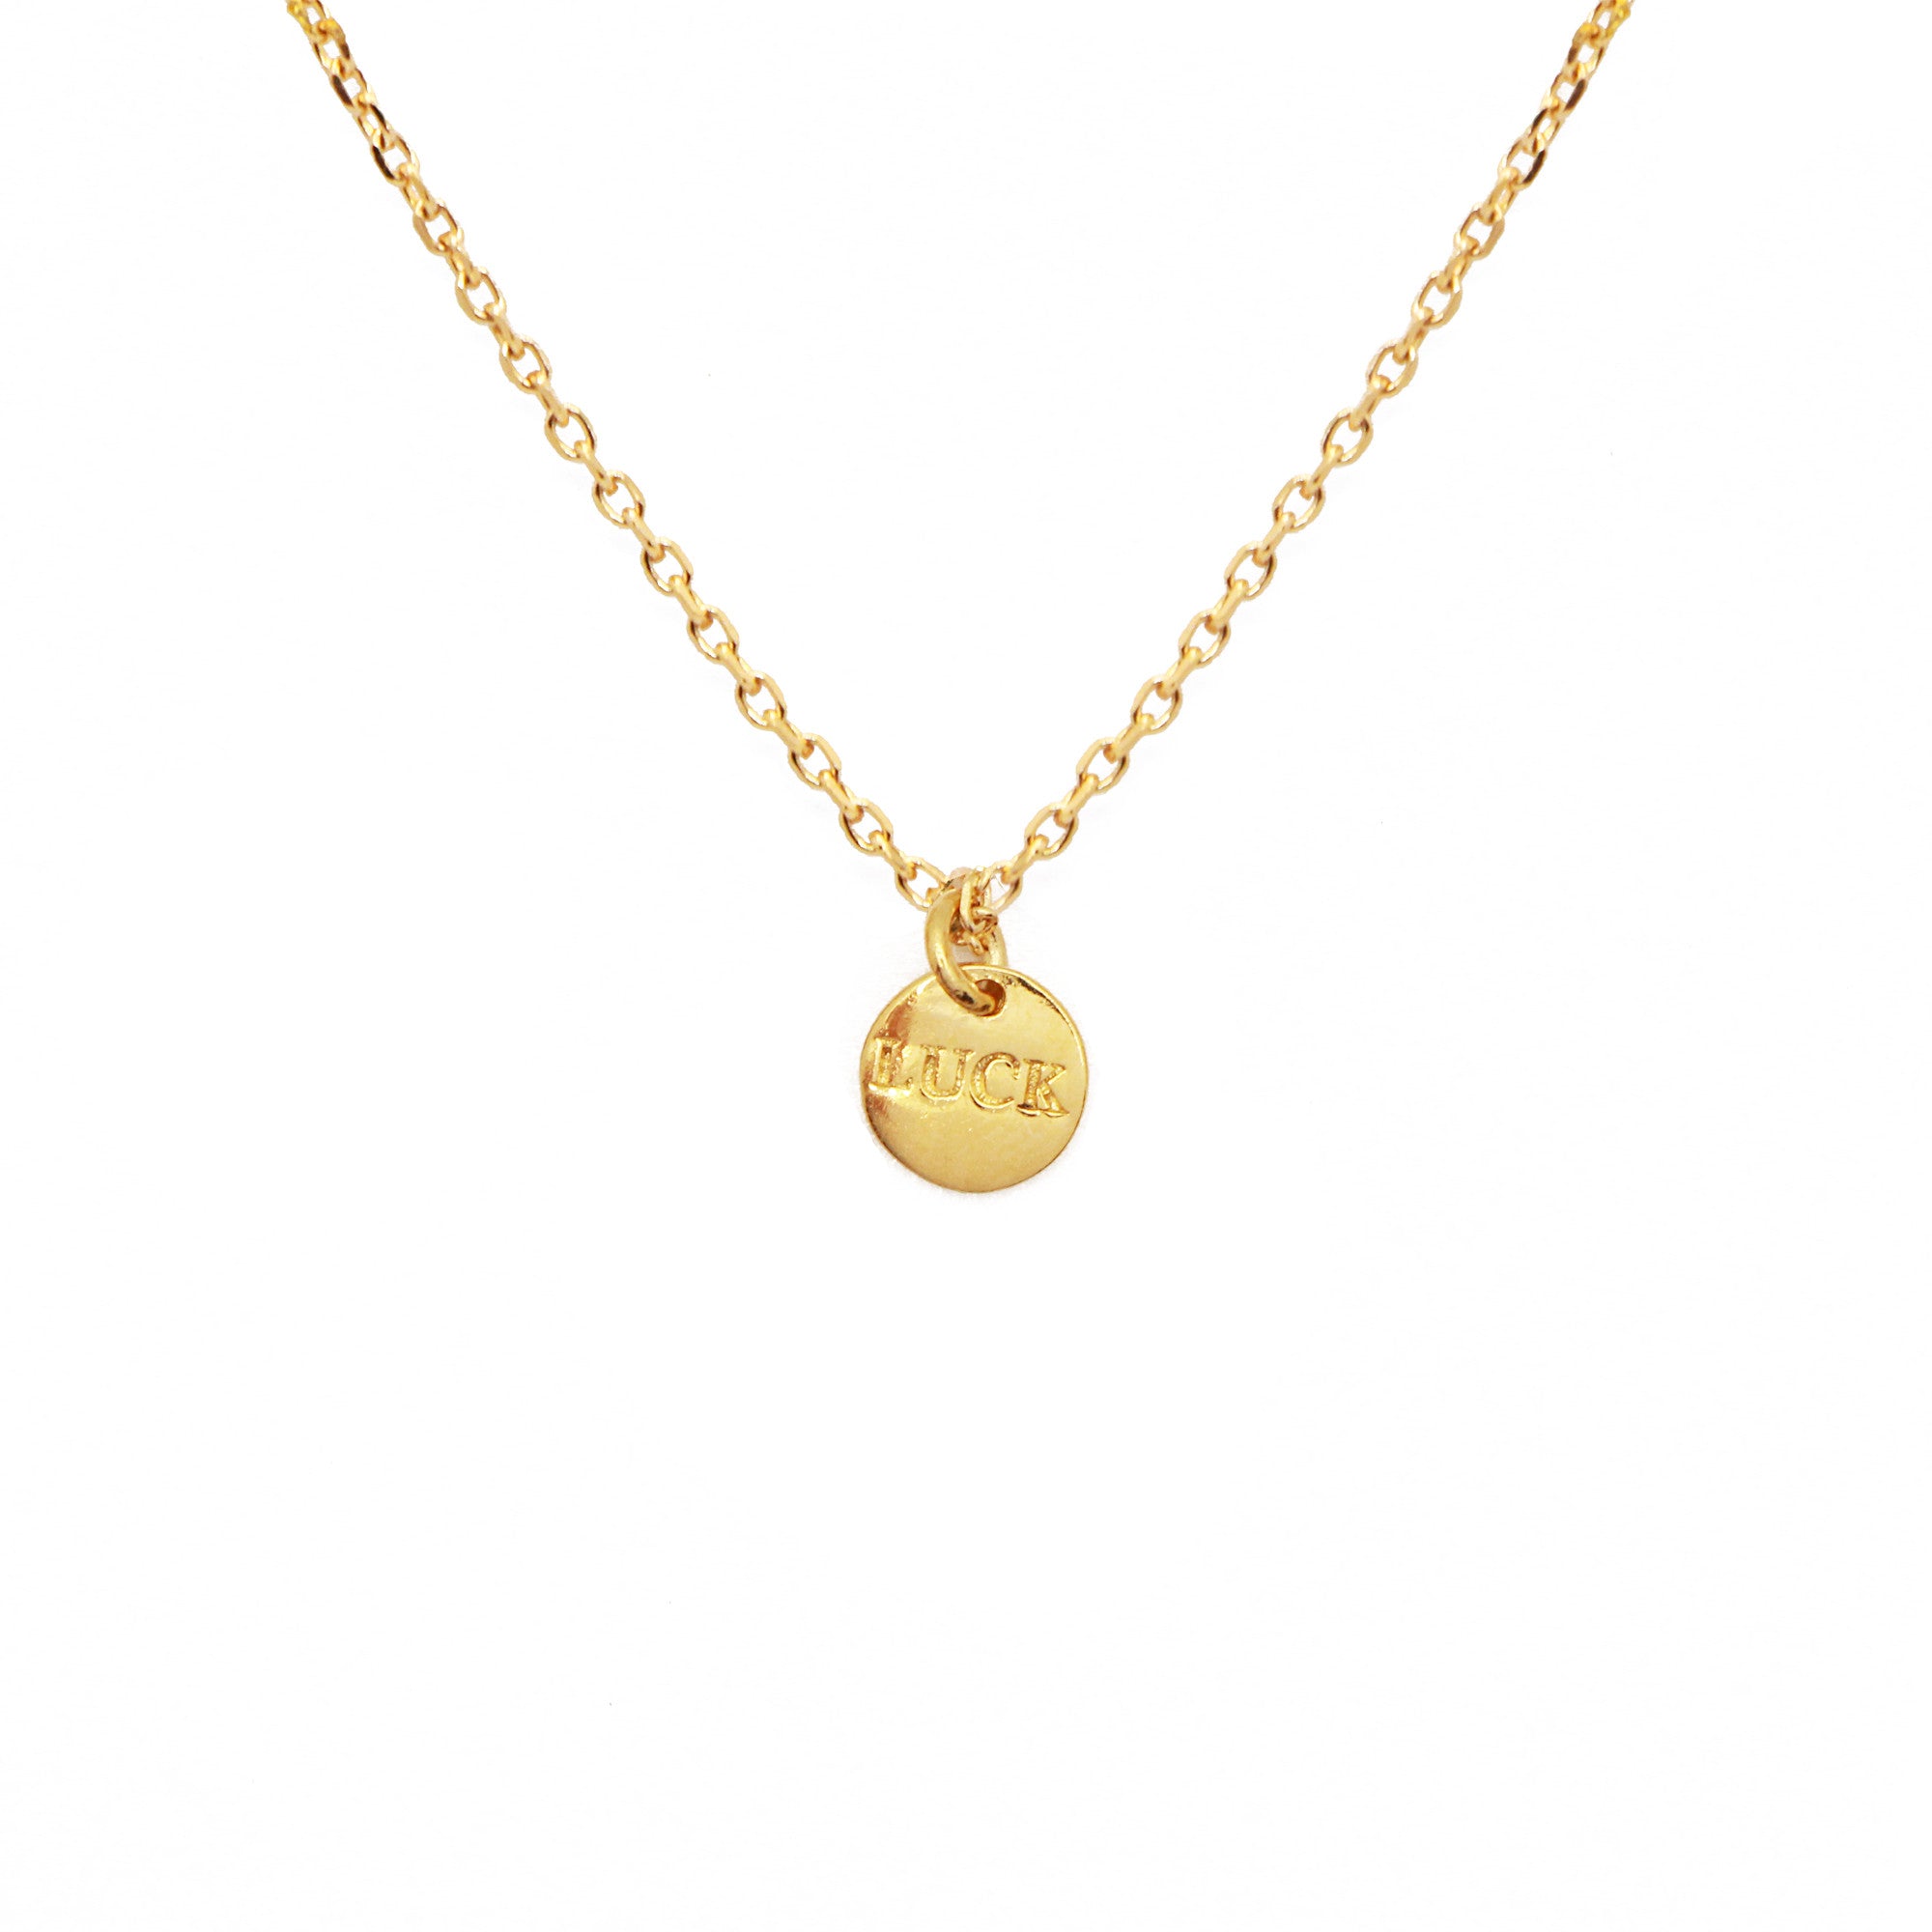 Luck charm necklace